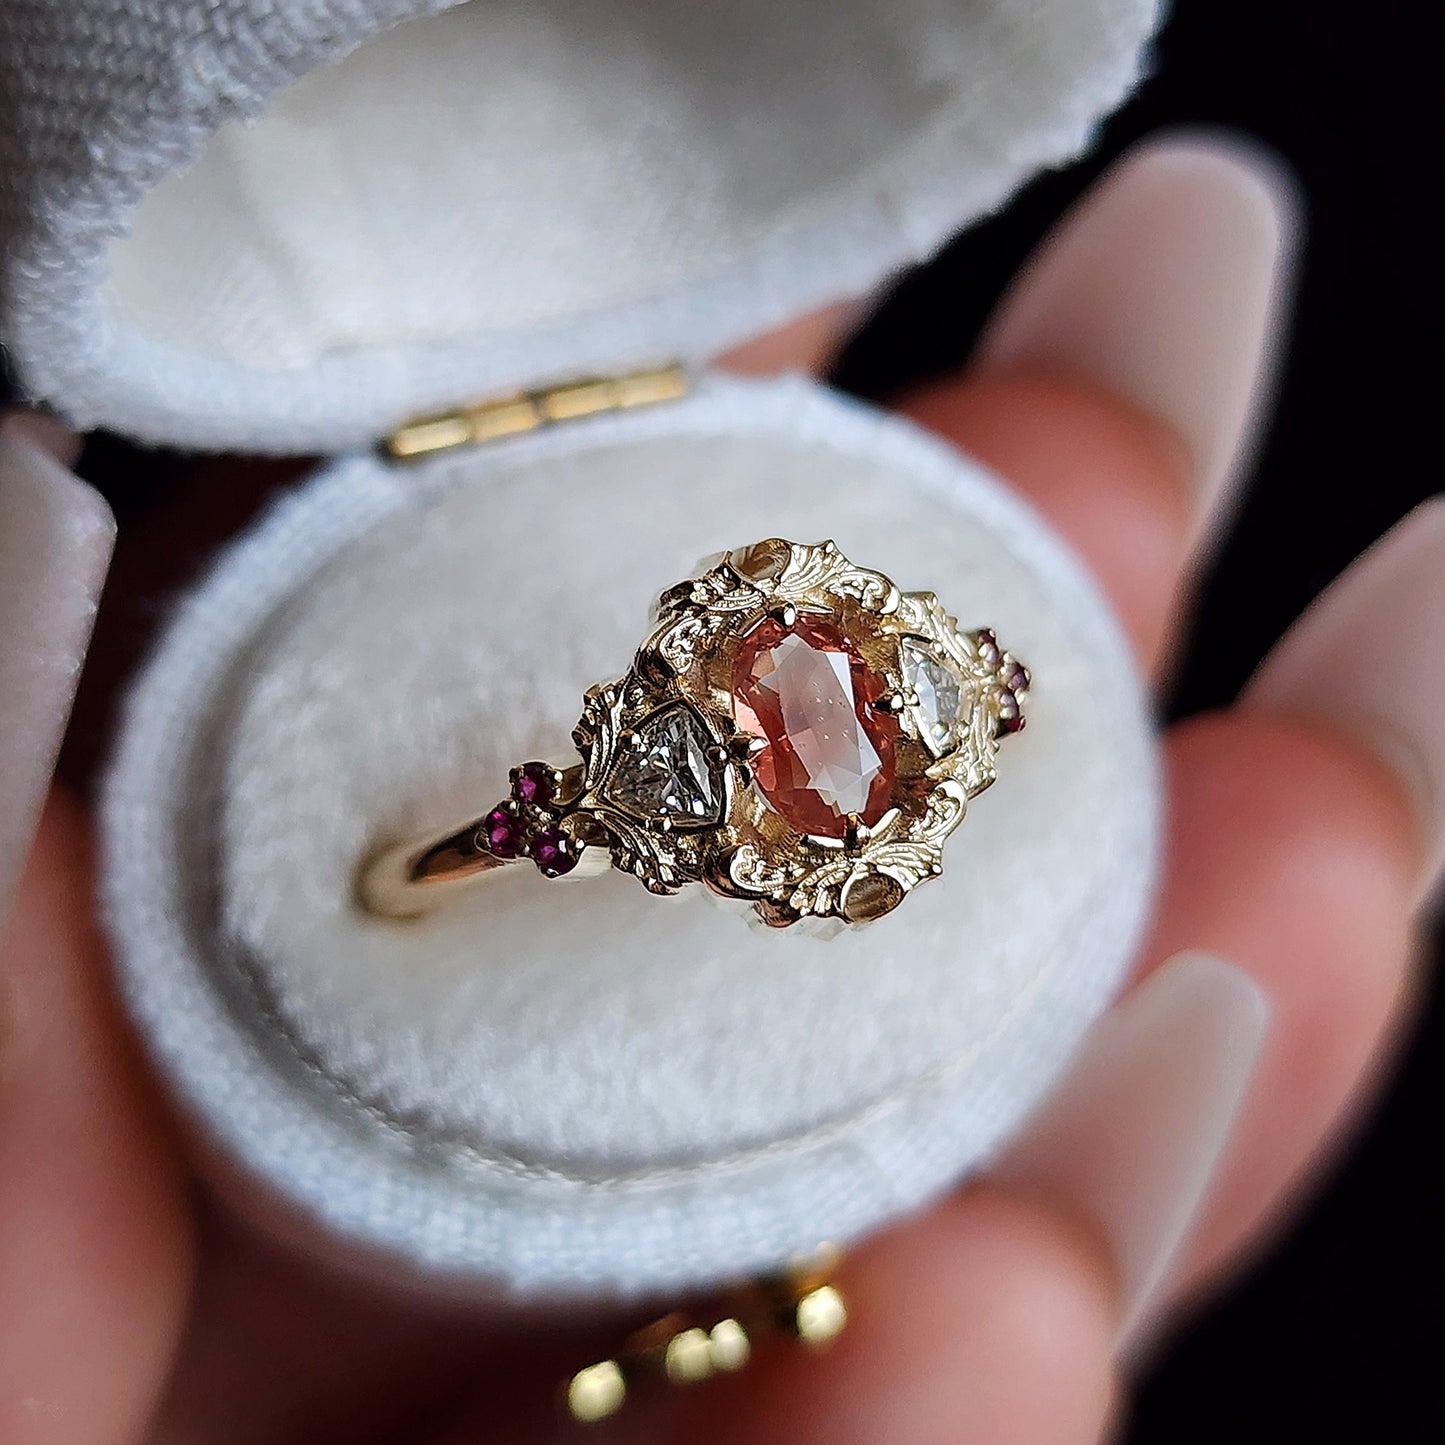 Ophelia Oregon sunstone and diamond trillion engagement ring with rubies antique details